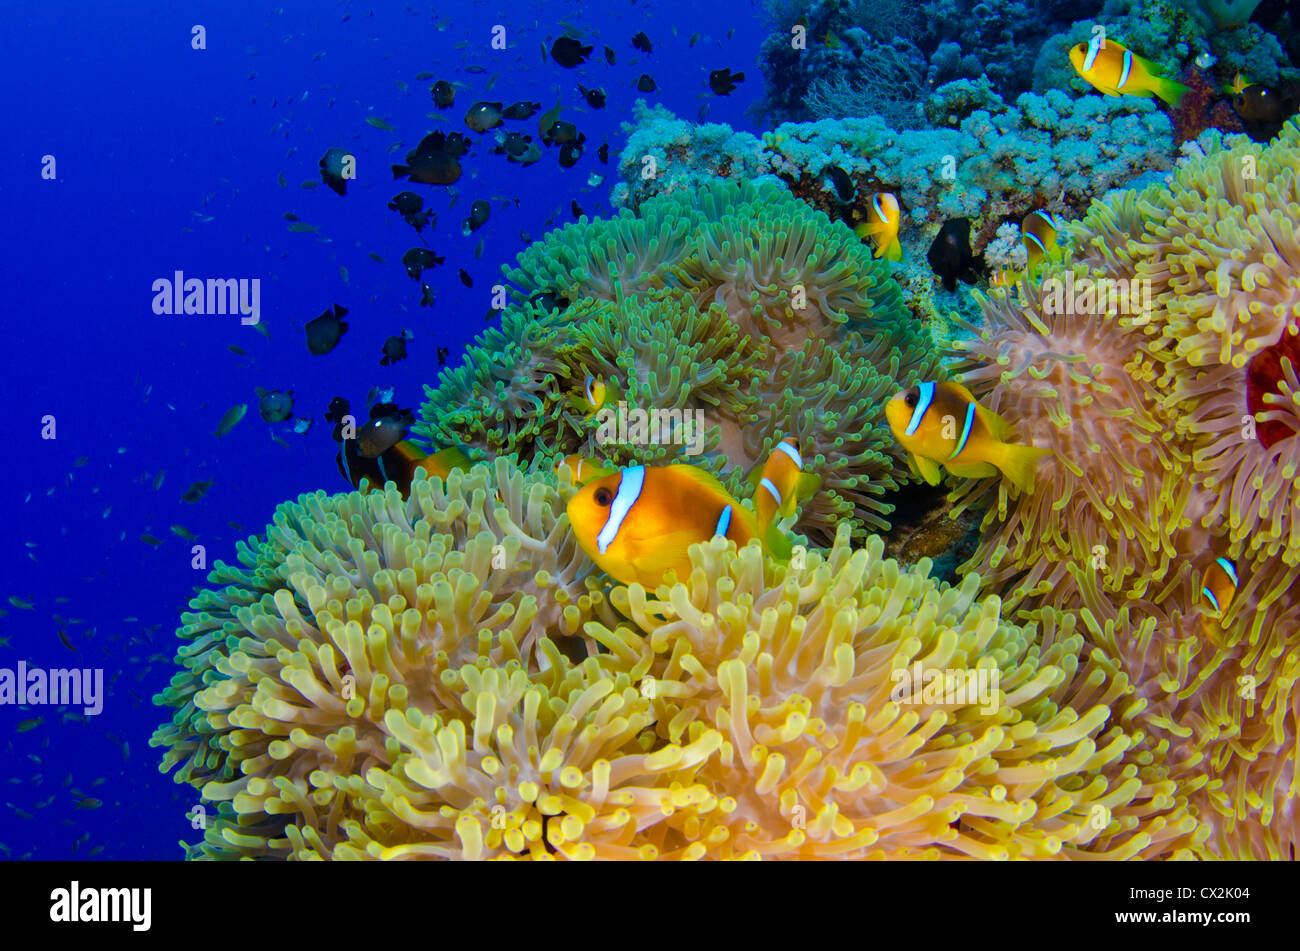 Red Sea, underwater, coral reef, sea life, marine life, ocean, scuba diving, vacation, water, fish, anemone, anemone fish, color Stock Photo